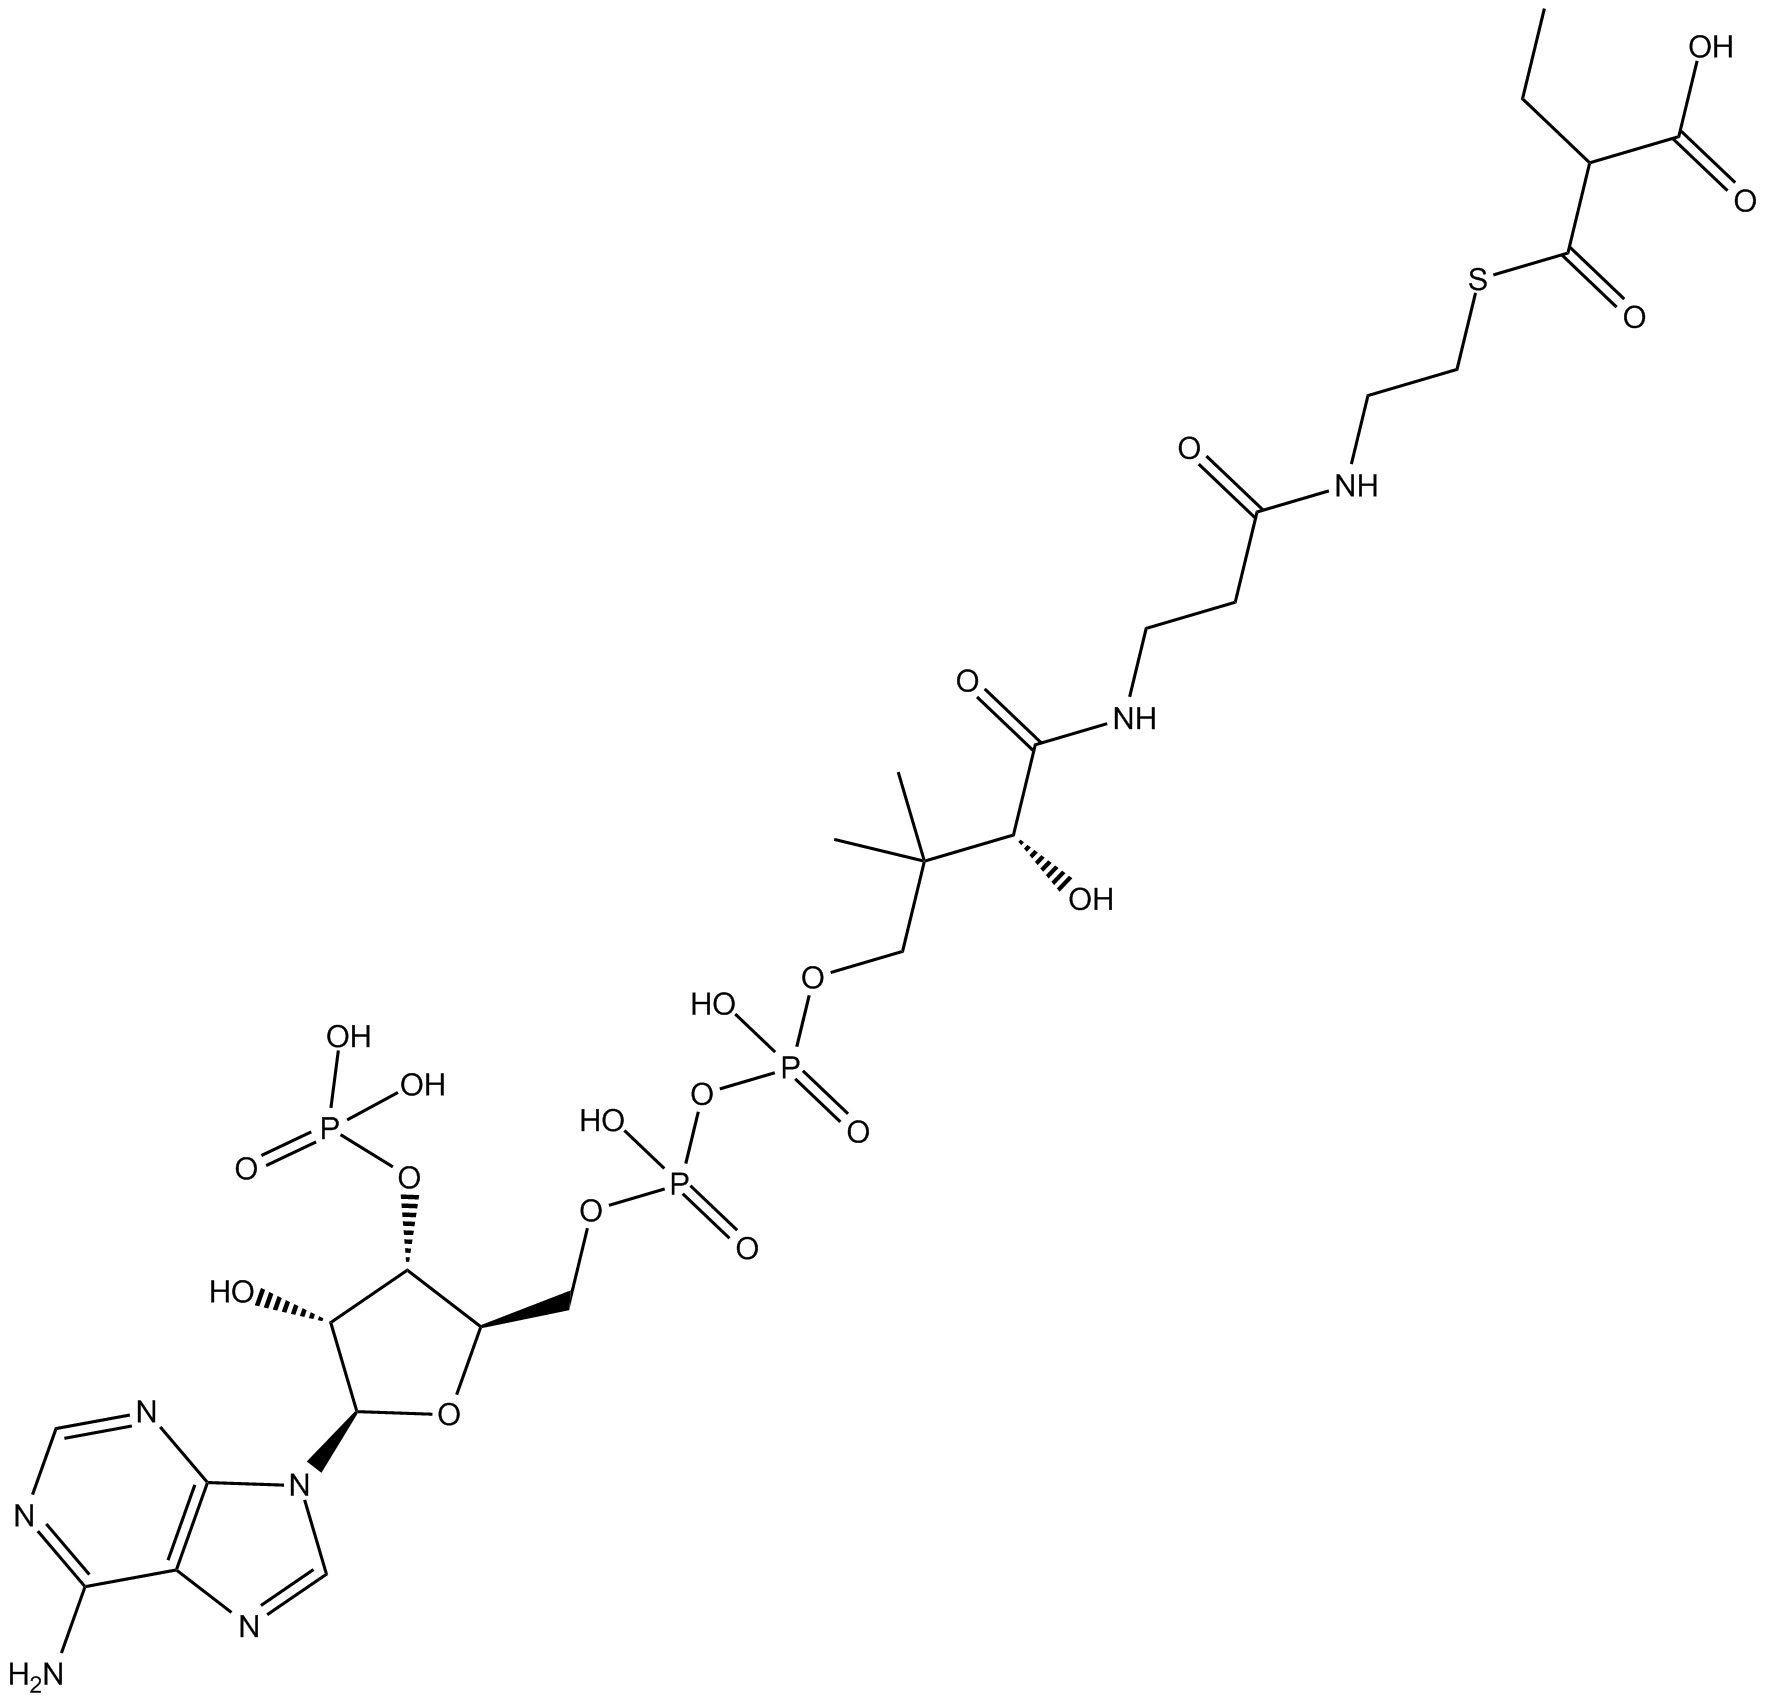 Ethylmalonyl Coenzyme A Chemical Structure